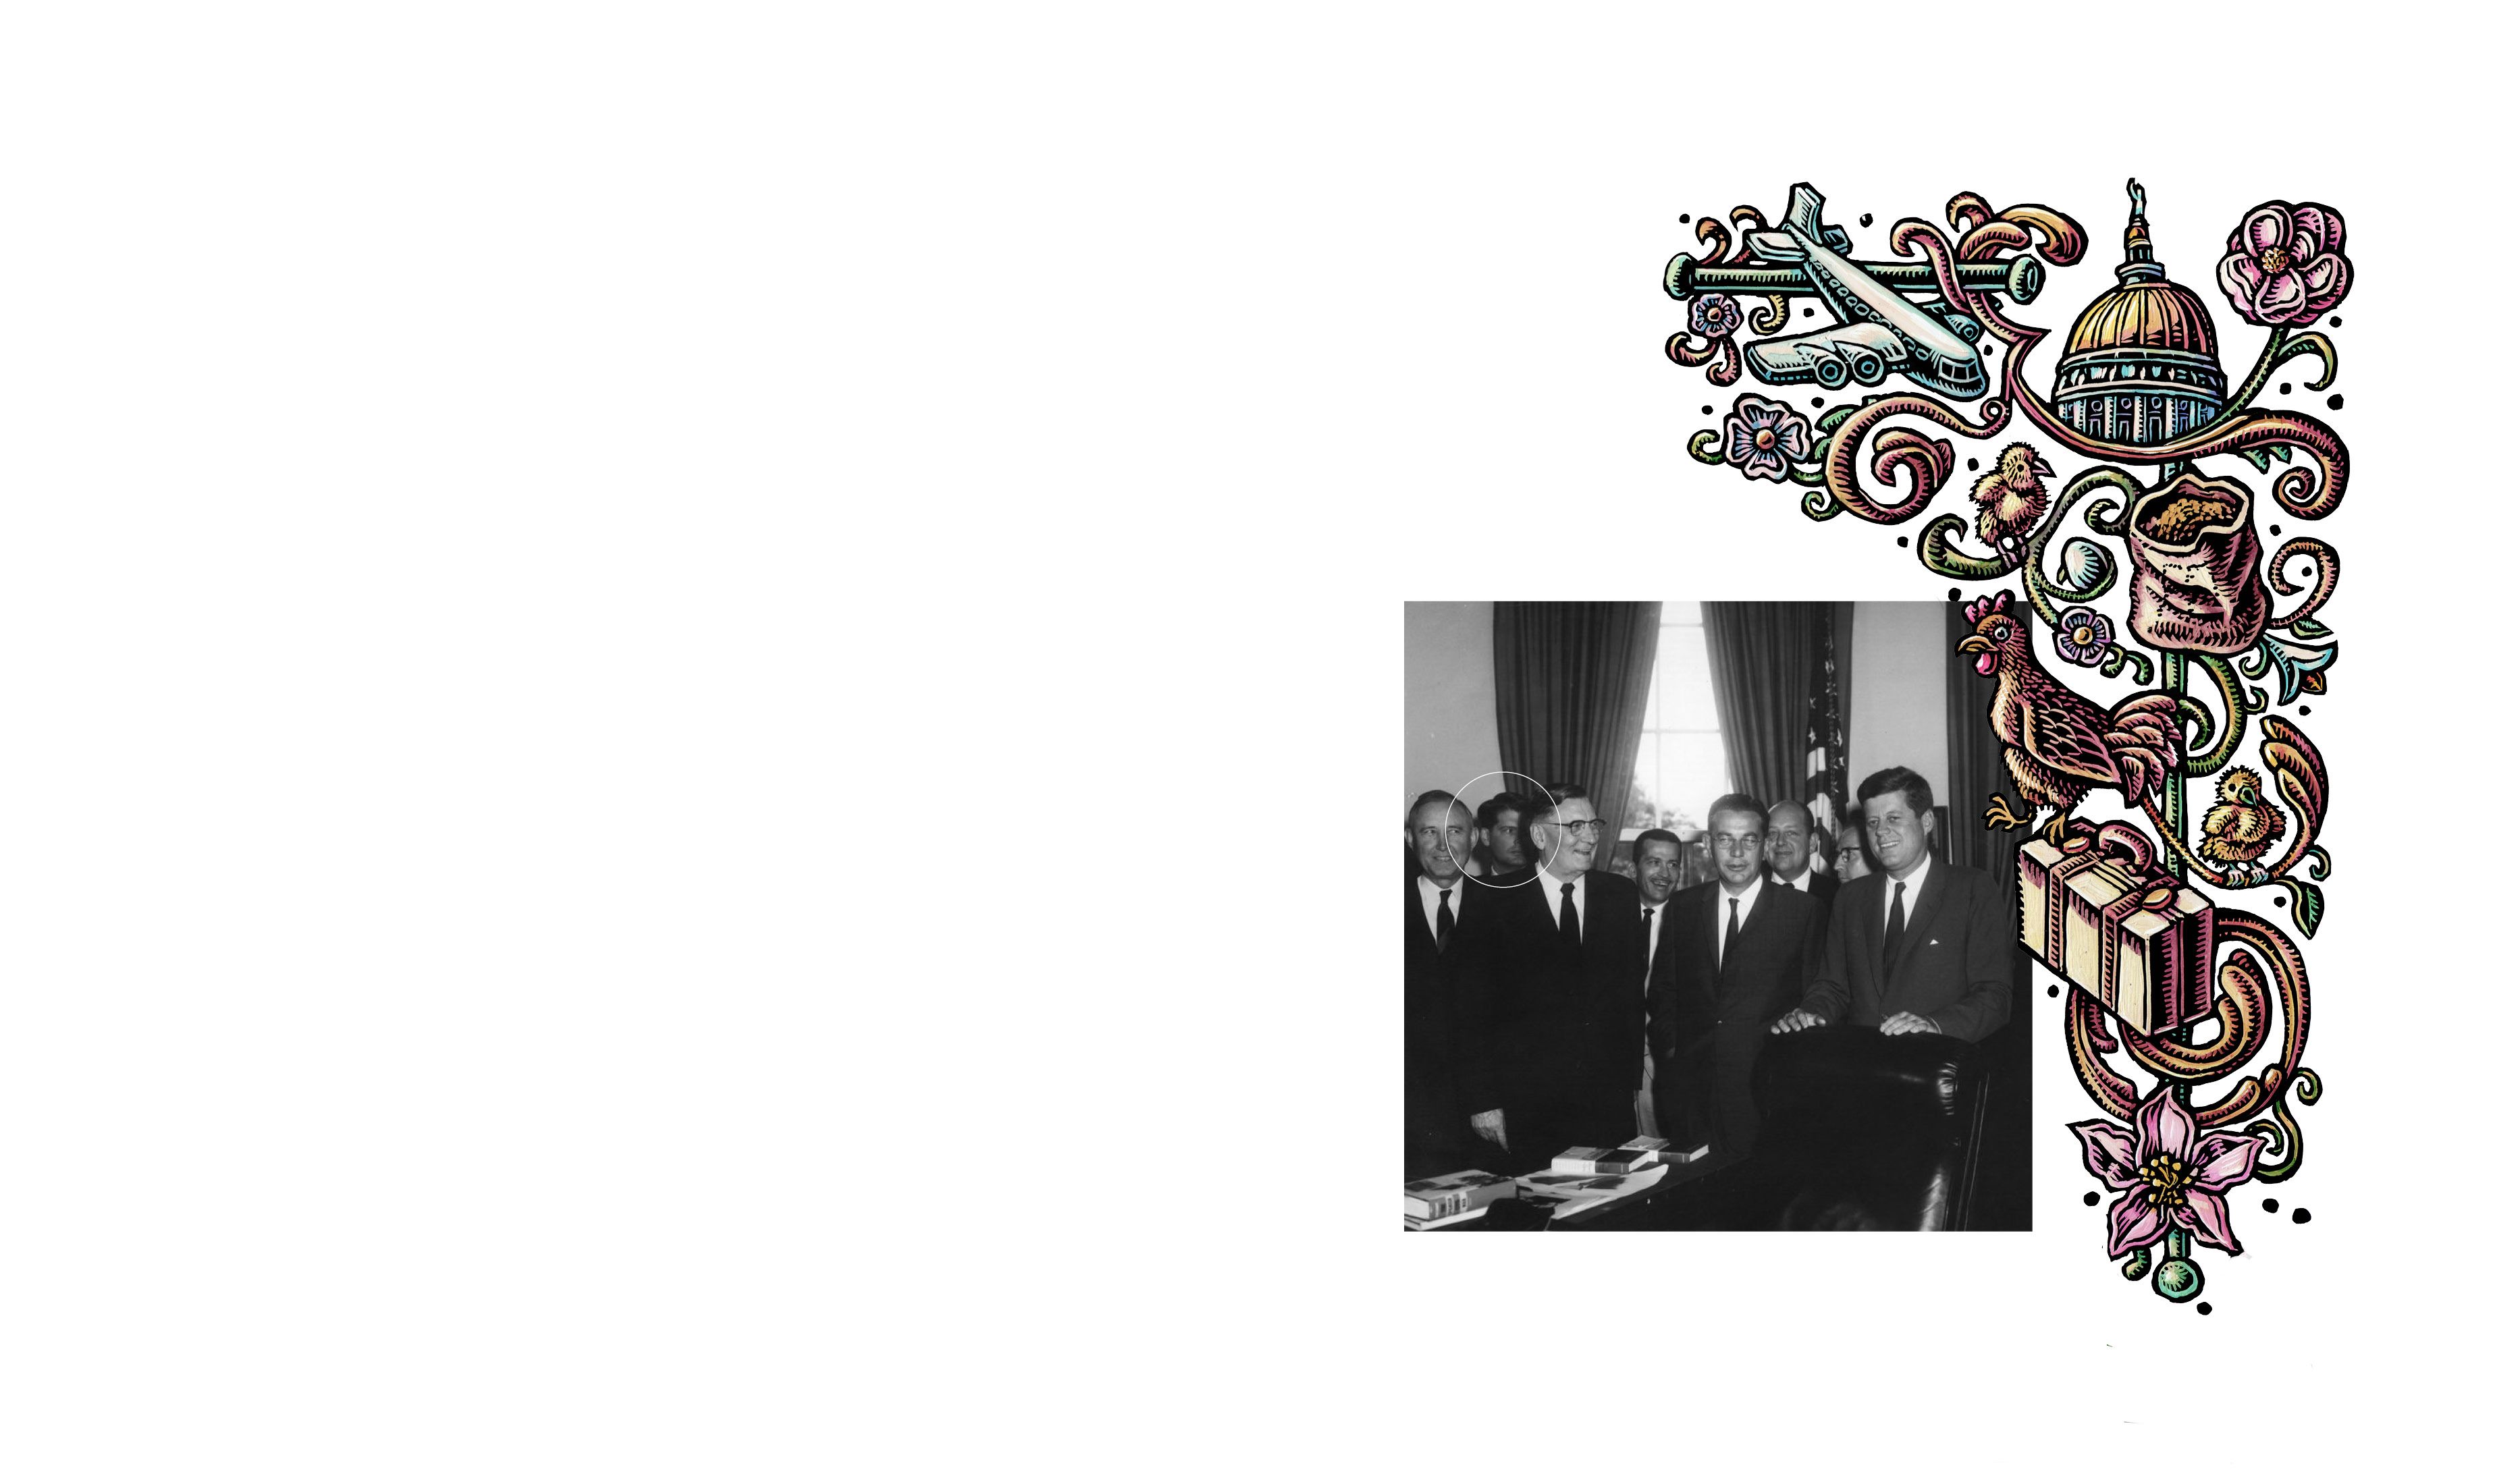 Decorative border made up of illustrations of the Georgia Capitol, chickens, and travel objects. A photo of Massey with John F. Kennedy is beside the border, and Massey is circled.